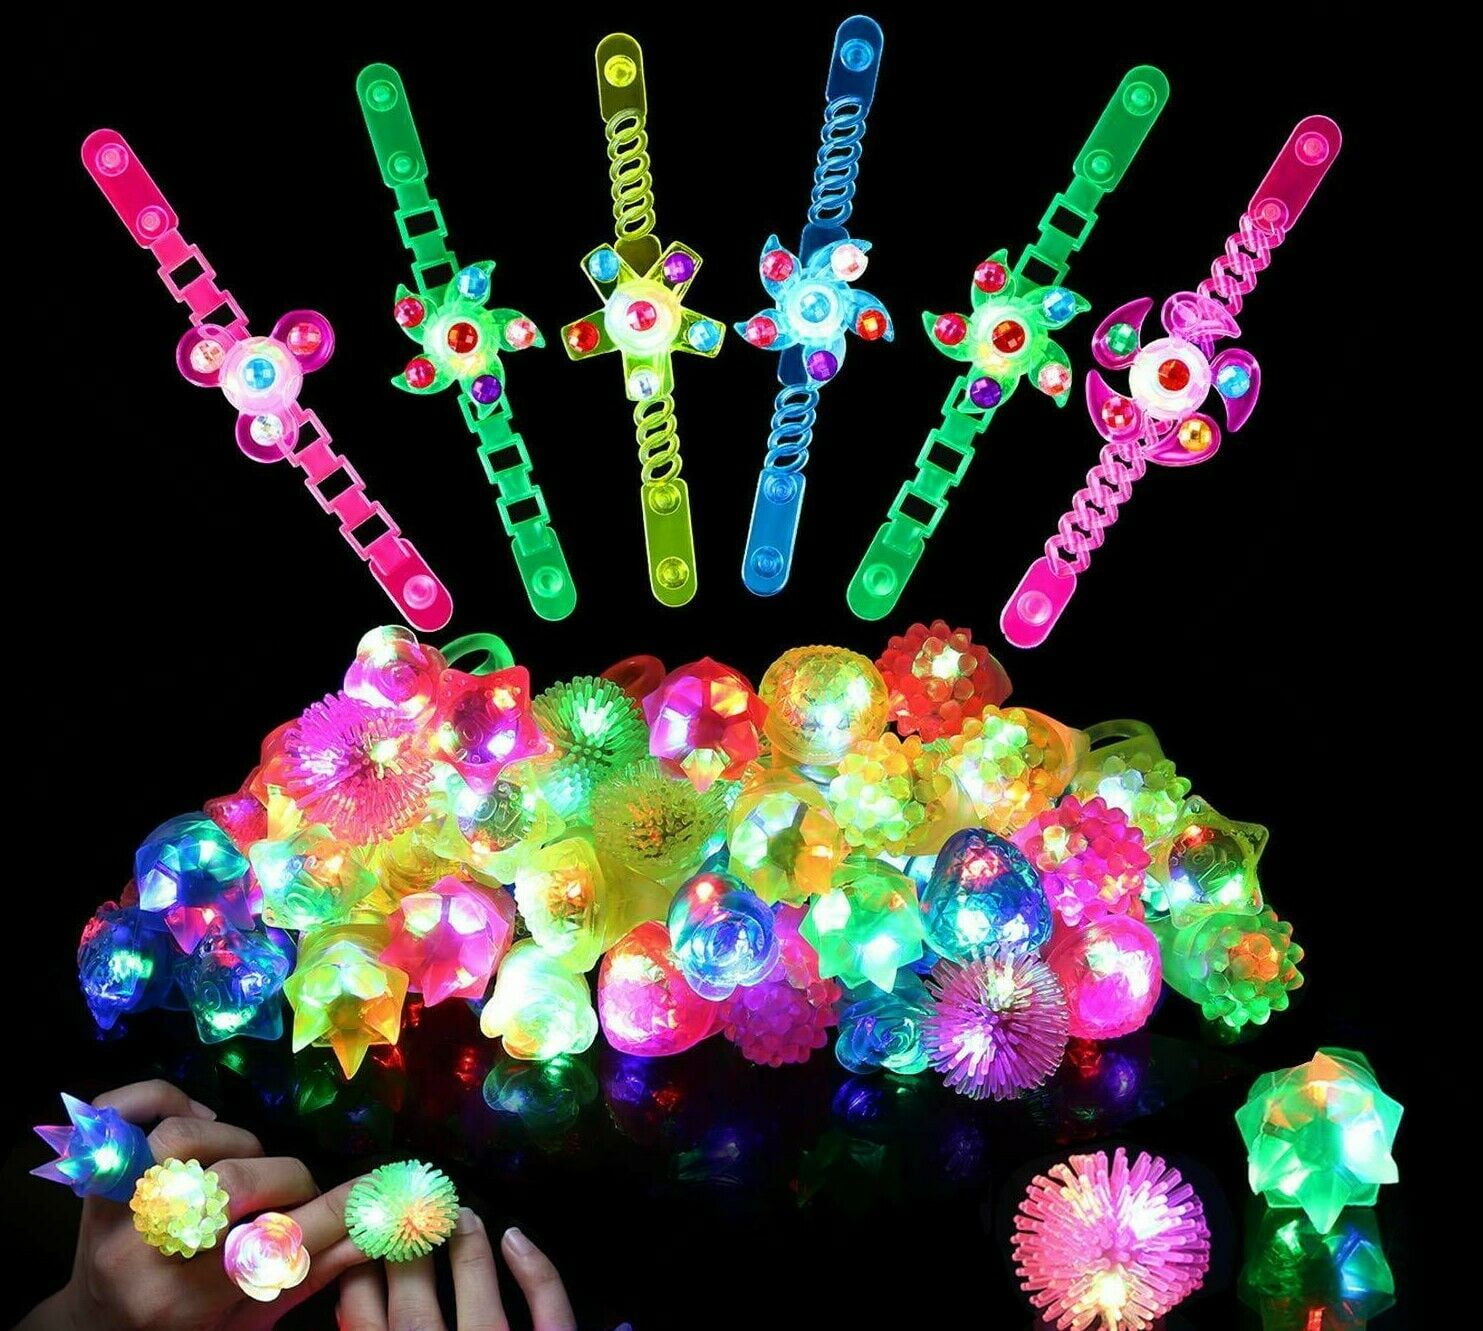 MIBOTE 67 PCS LED Light Up Toys Party Favors for Kids Glow in the Dark  Party Supplies for Adults with 40 Finger Lights, 10 Jelly Rings, 5 Flashing  Glasses, 4 Bracelets, 4